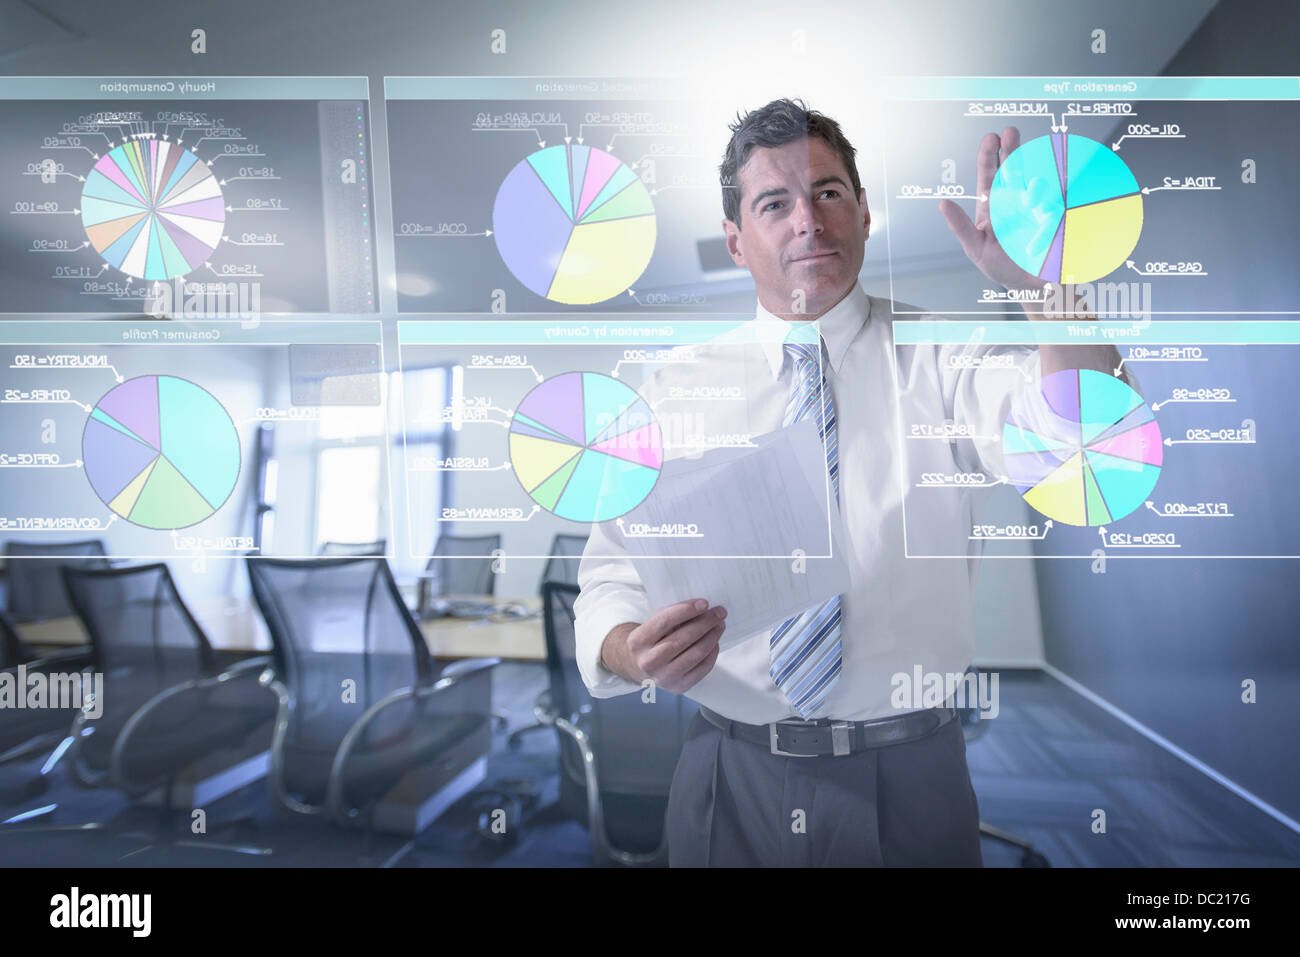 Businessman looking at pie charts on interactive screen Stock Photo